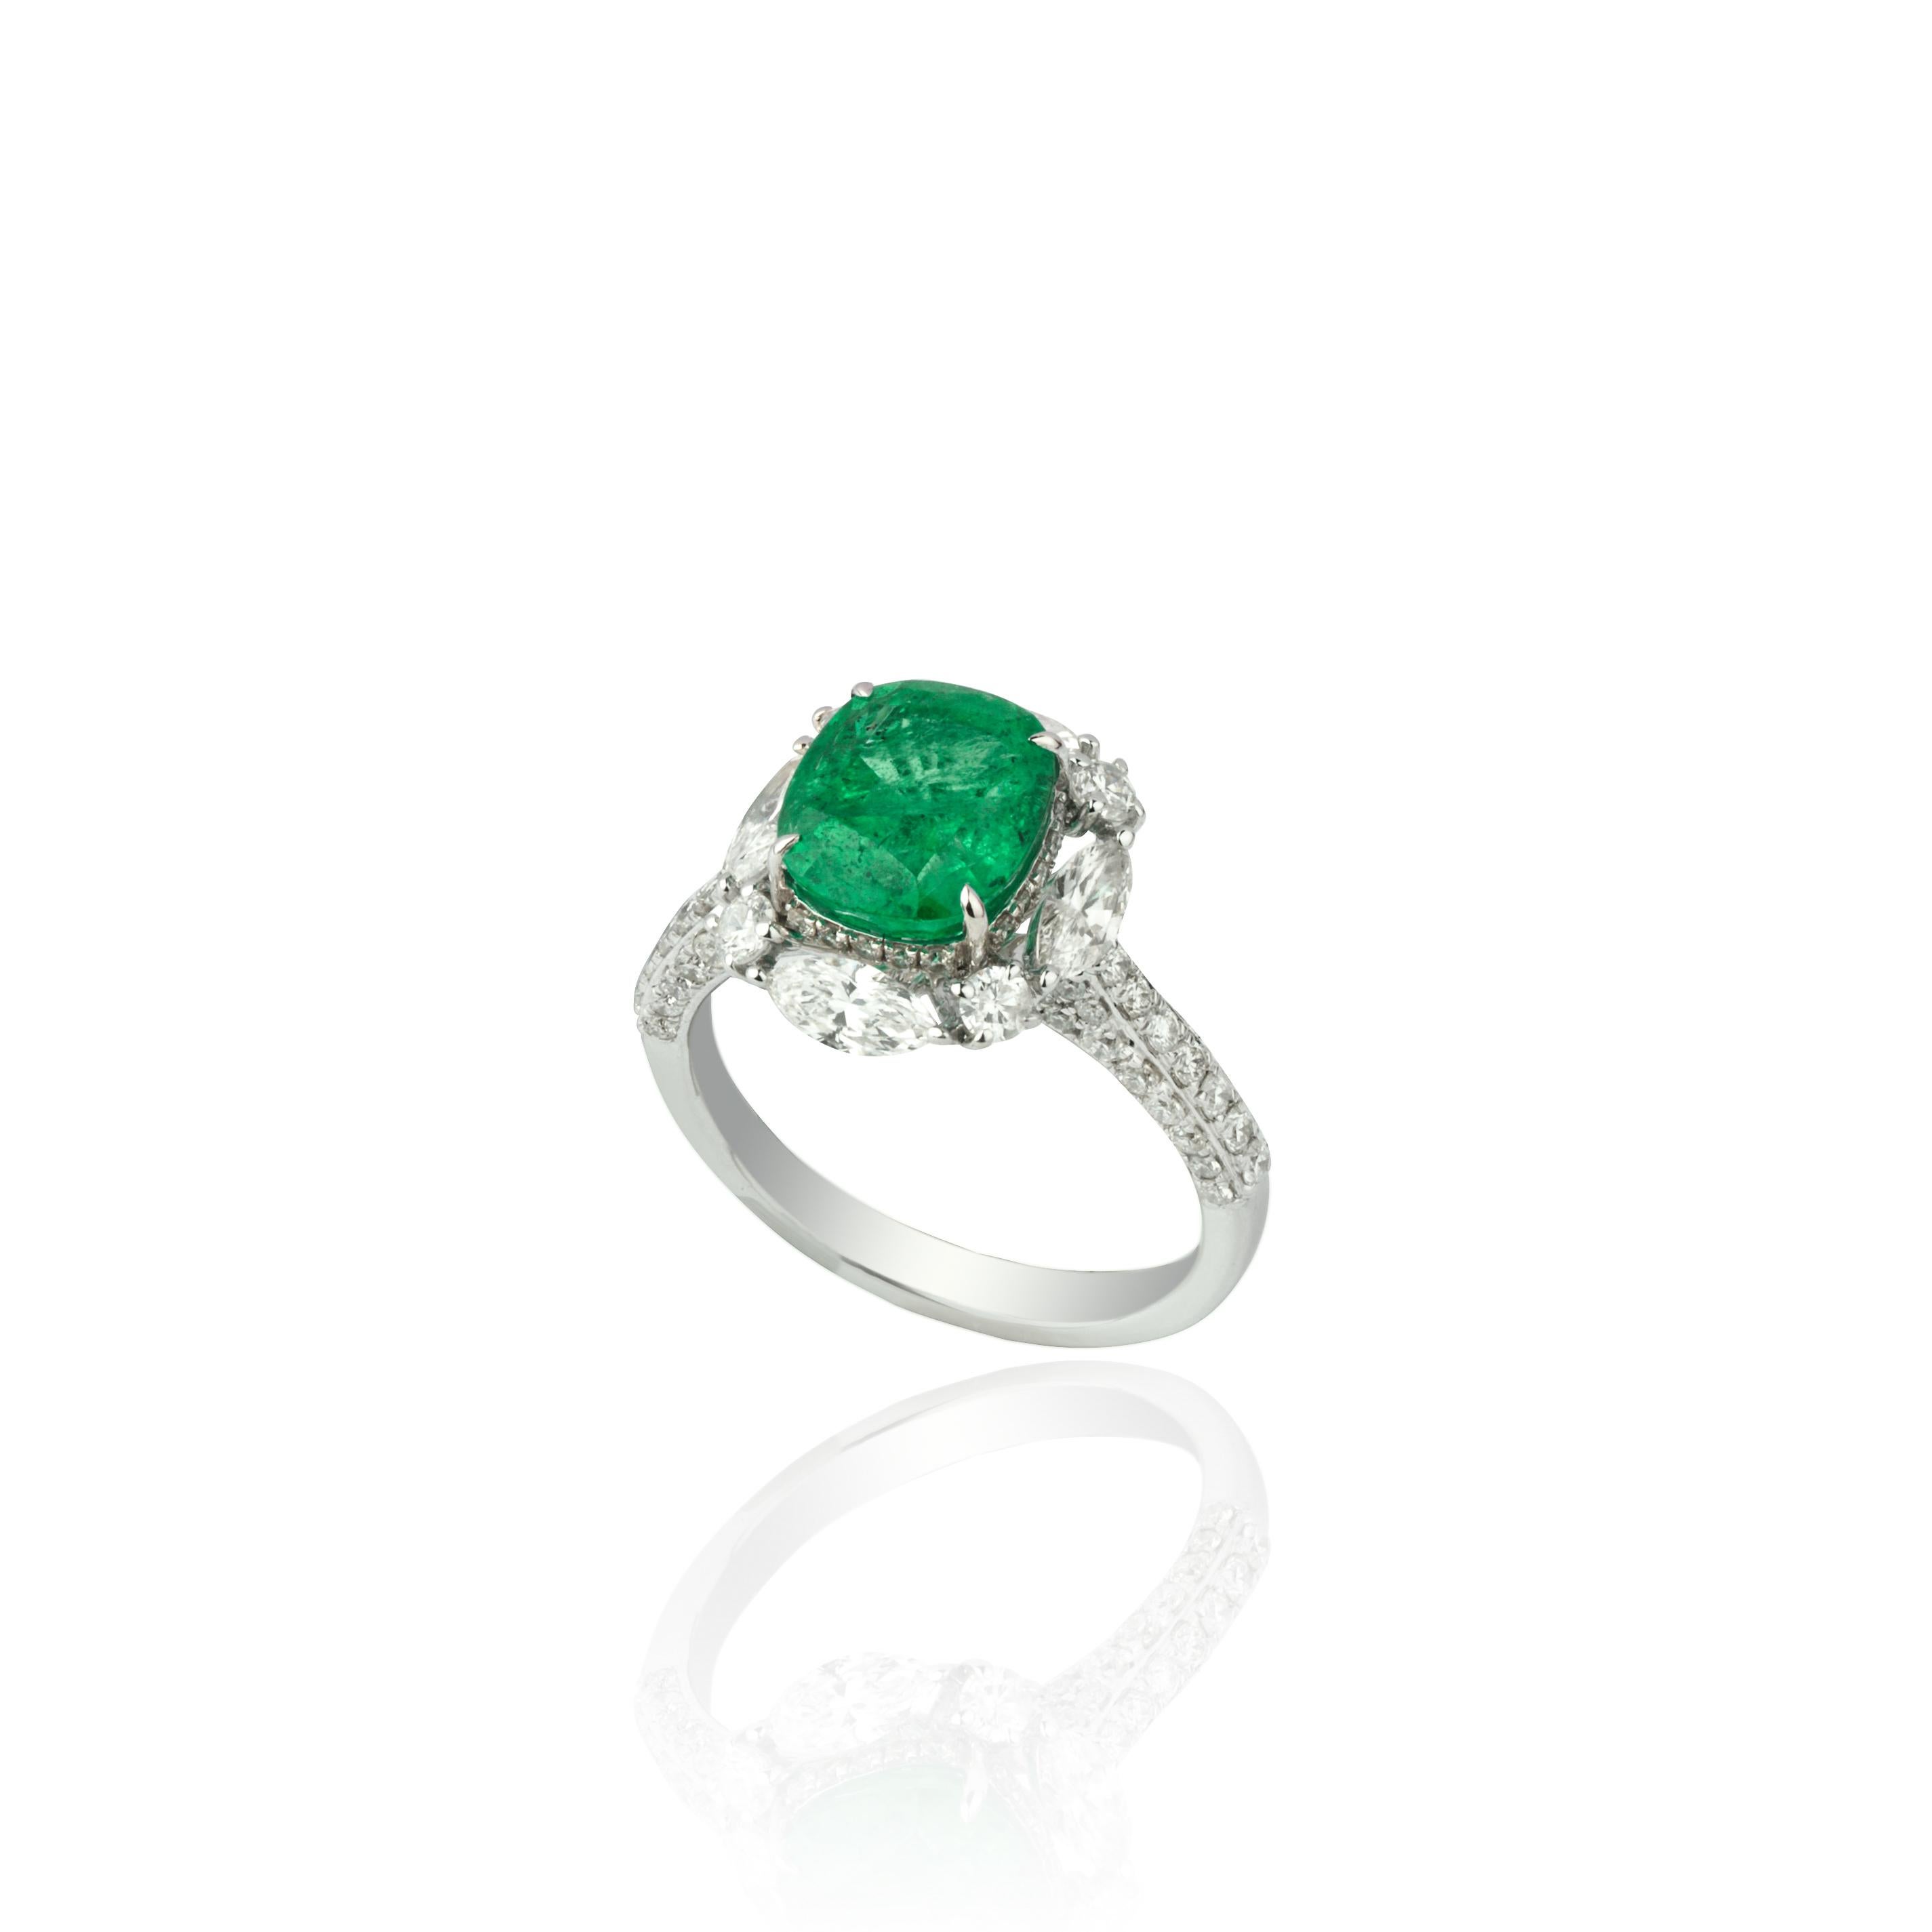 Introducing our exquisite 18 Karat White Gold Ring featuring a stunning 2.77 carat natural Zambian Emerald and  1.55 carats of diamonds. This ring is truly remarkable, showcasing the beauty of the emerald and the brilliance of the diamonds.

Crafted